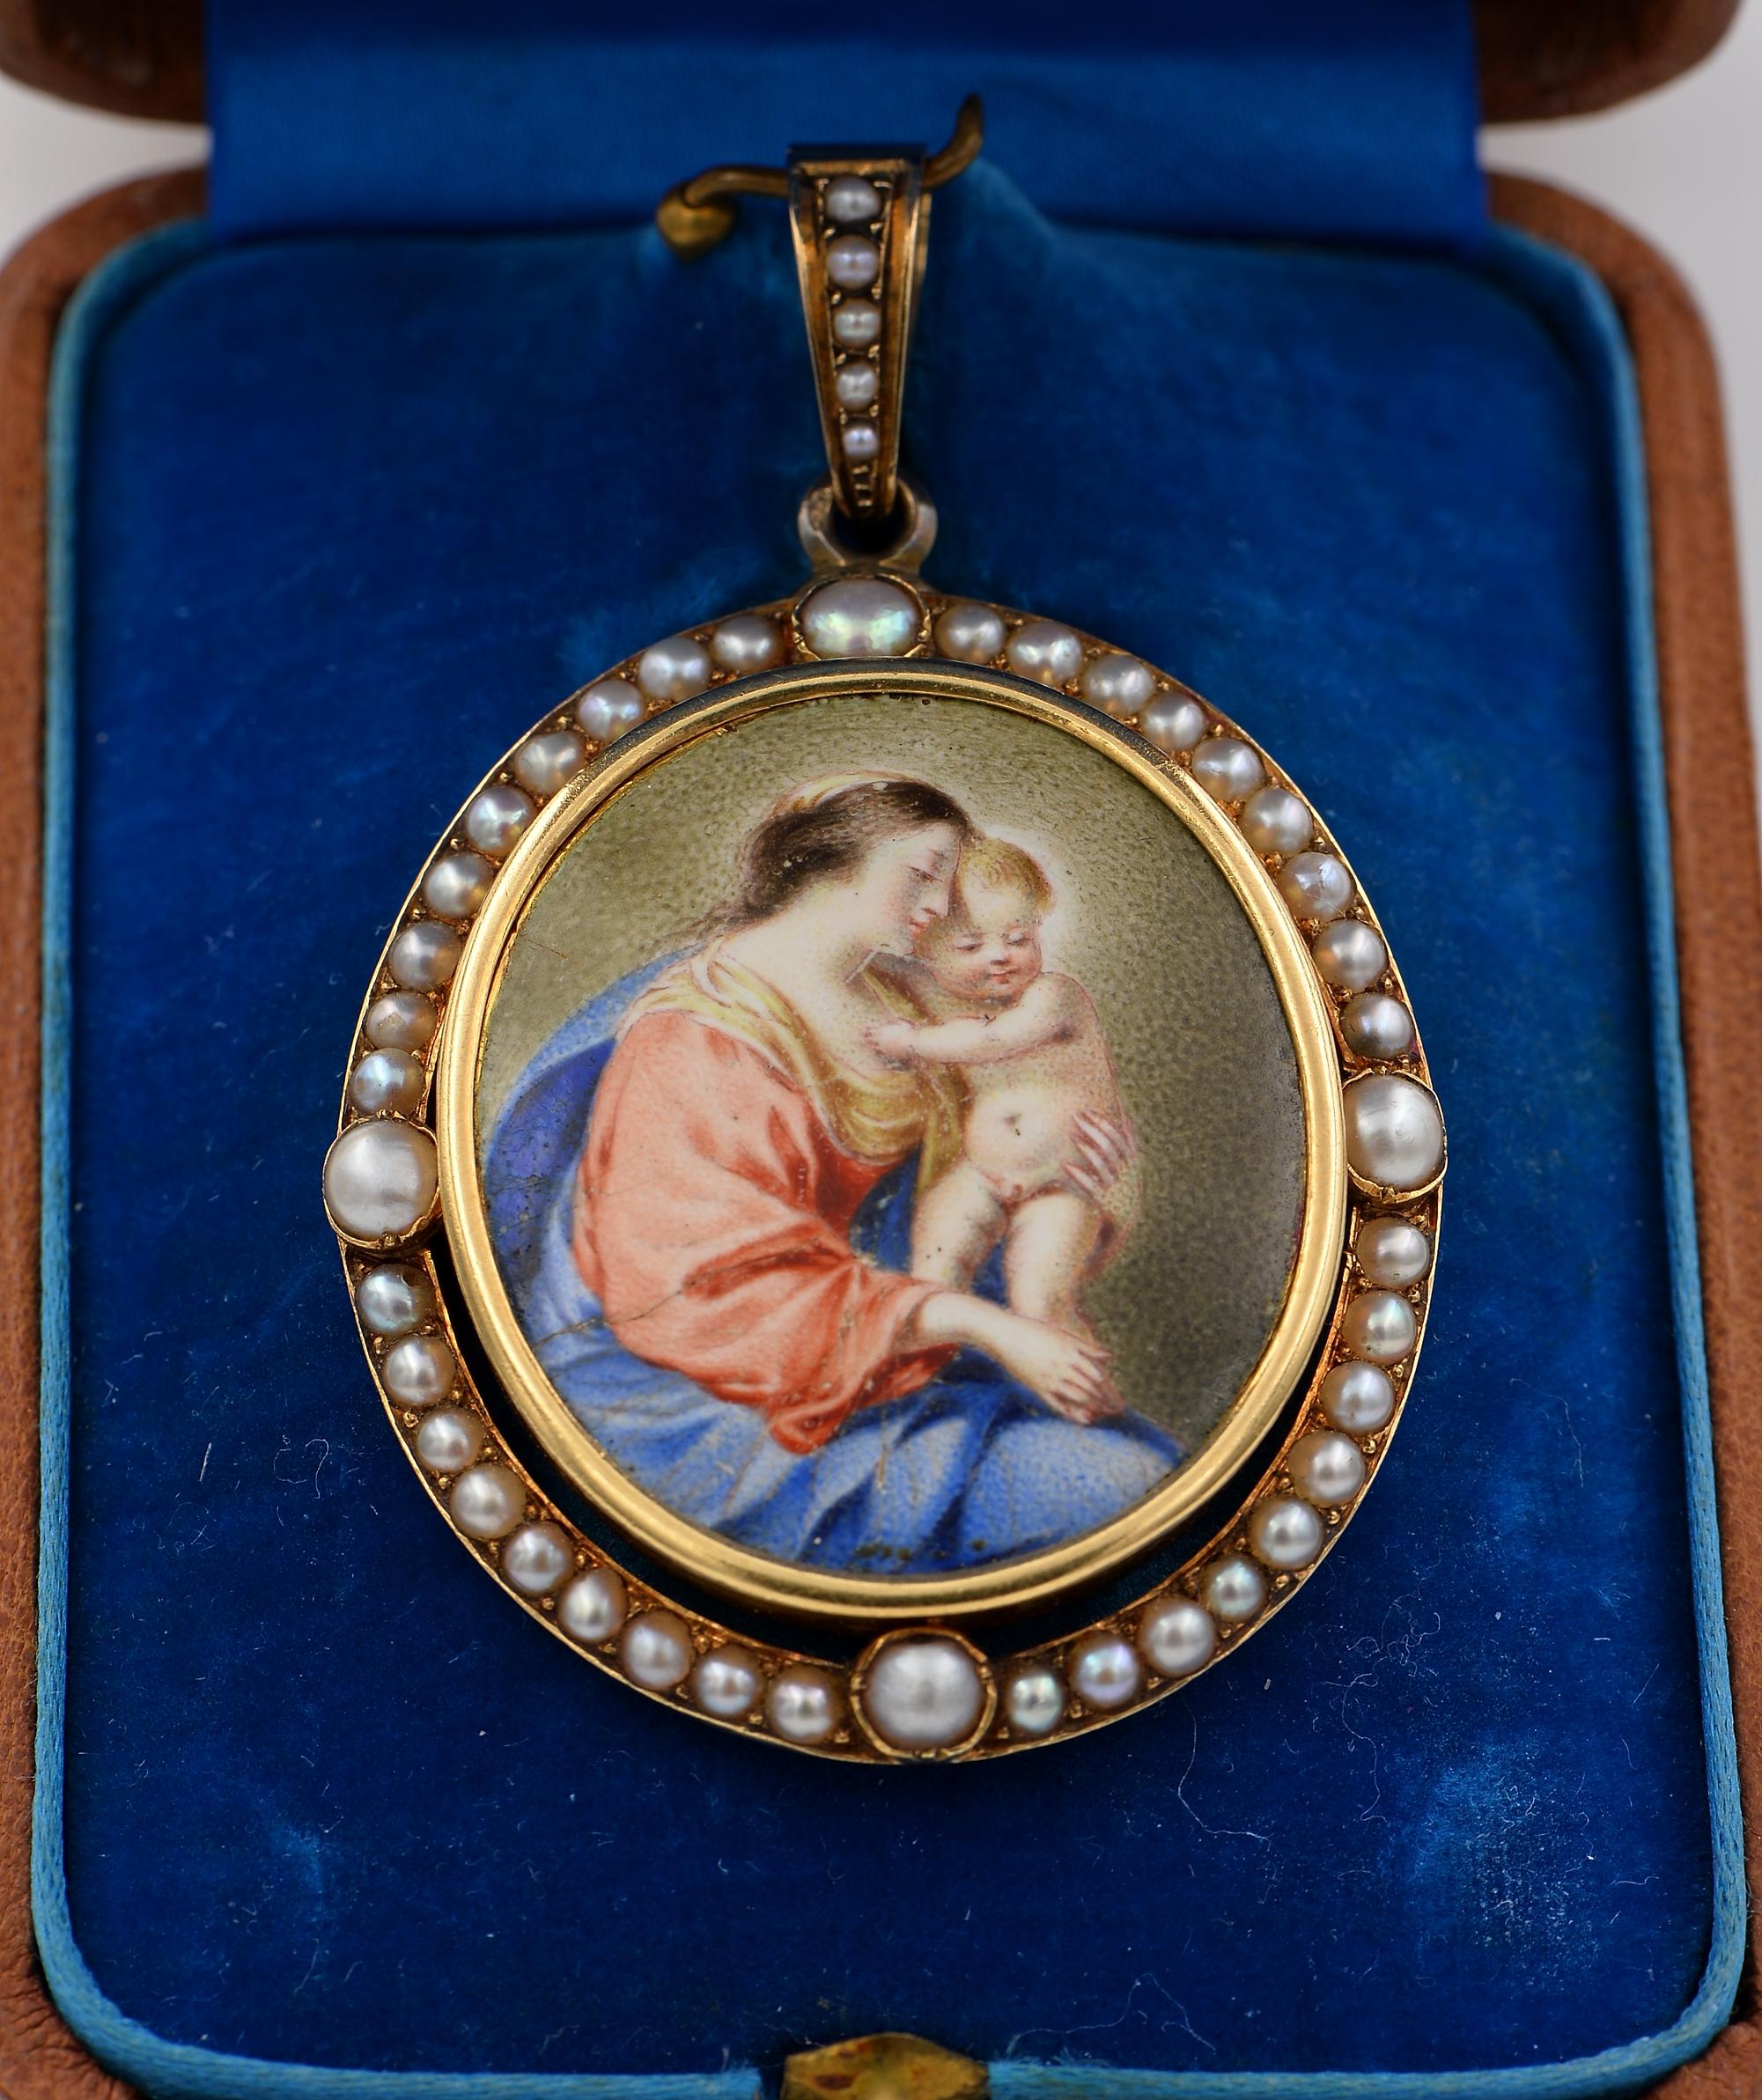 Virgin Mary and Baby
This impressive 1870 ca is French origin, bears French hallmark
Large and outstanding example comes in its original box from Paris
Beautiful religious art work hand crafted of solid 18 Kt gold
The miniature itself is 29 x 25 mm